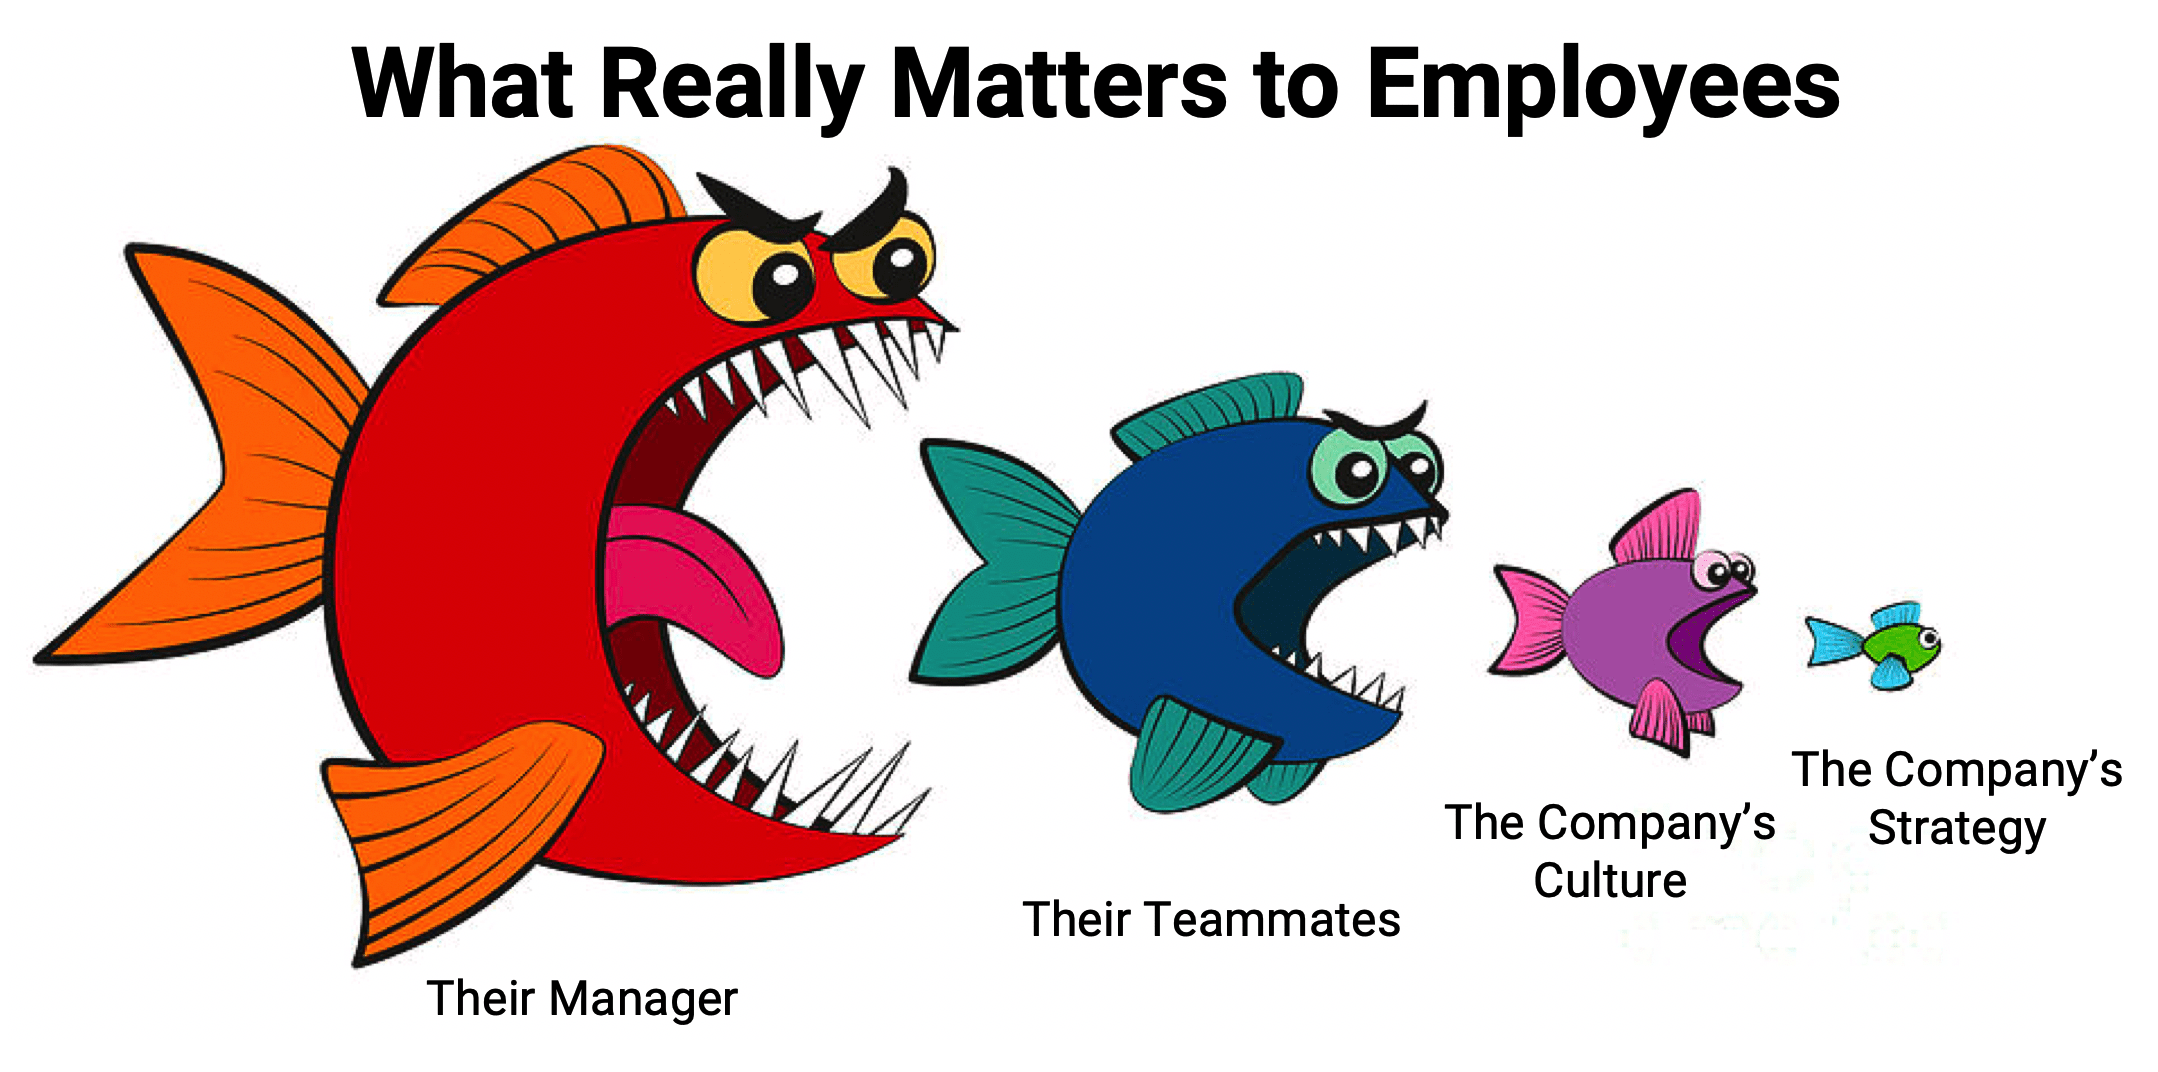 What really matters to employees